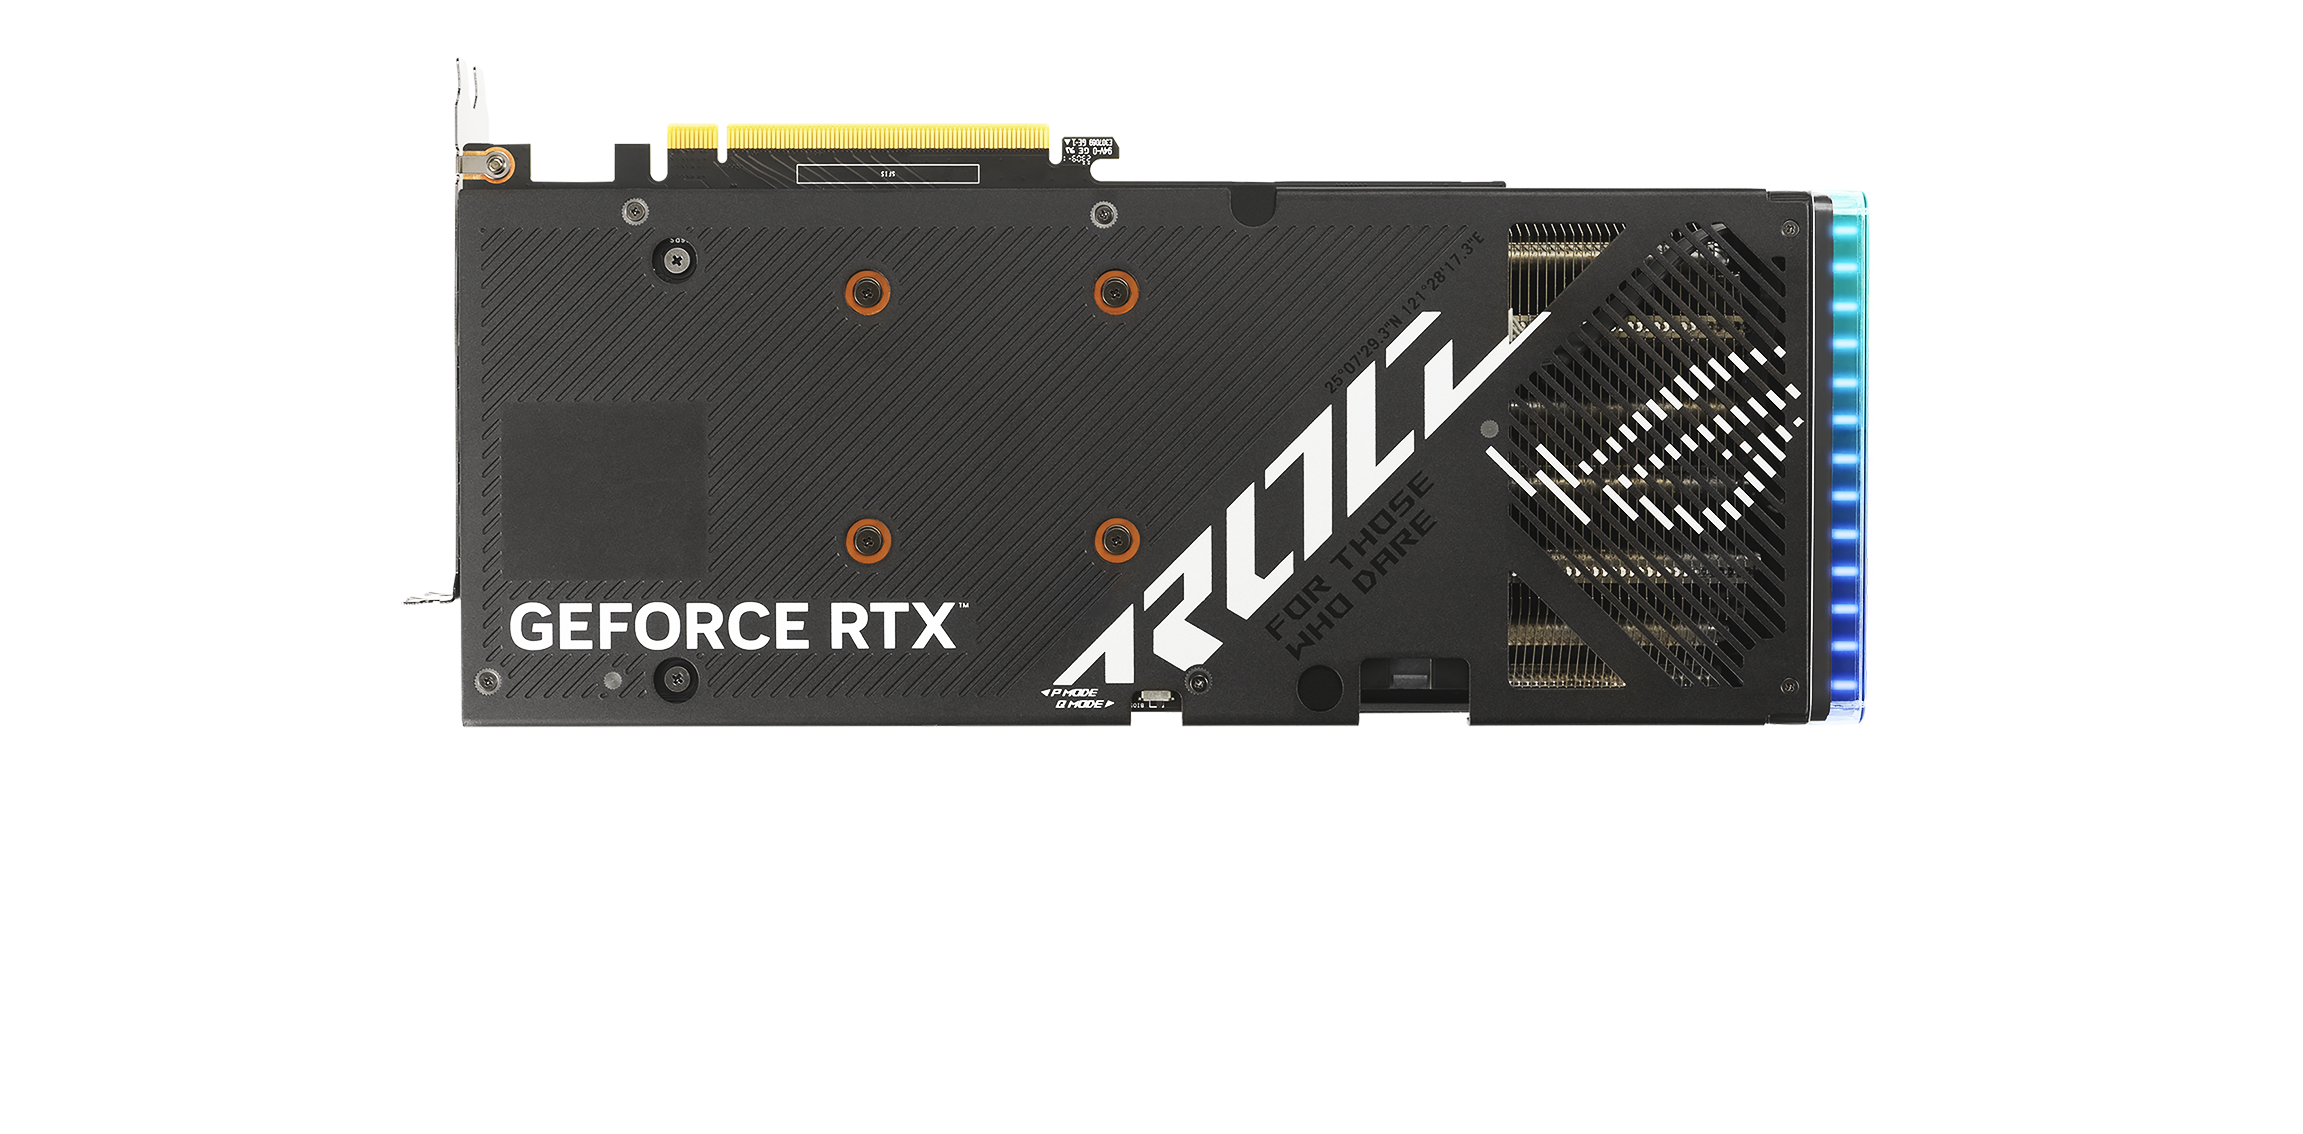 Rear view of the ROG Strix GeForce RTX 4060 graphics card.